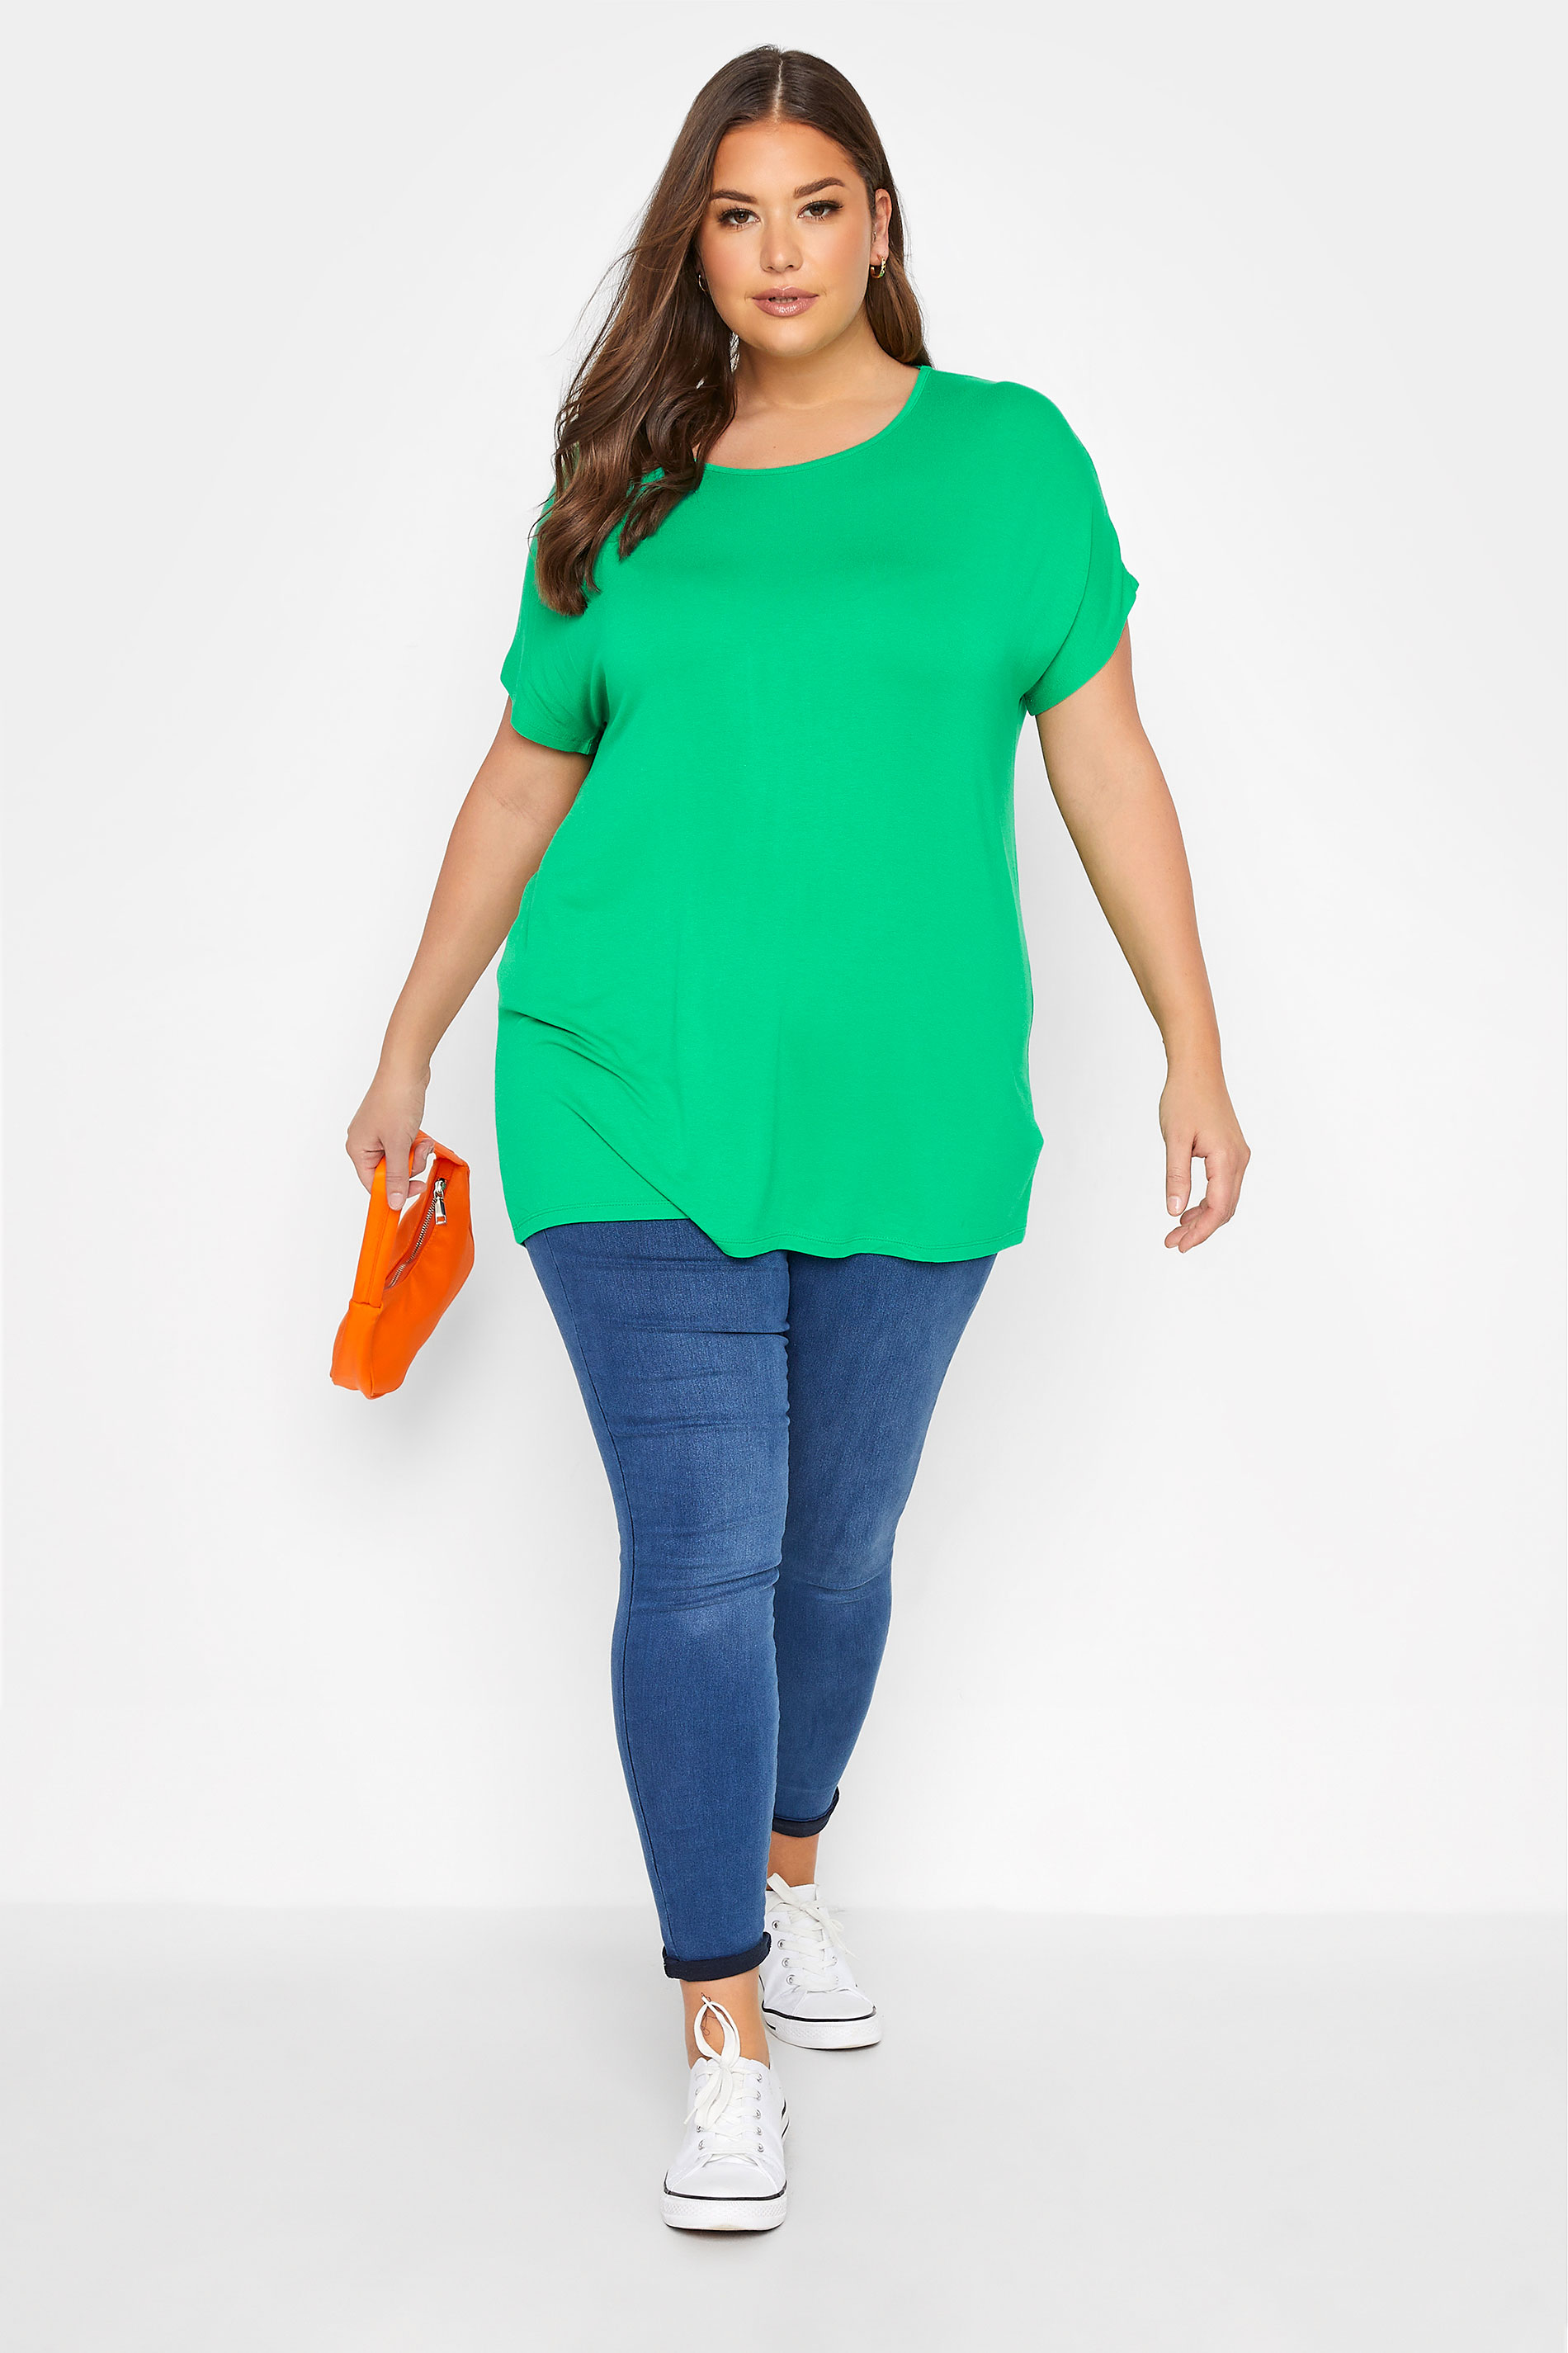 Grande taille  Tops Grande taille  T-Shirts | T-Shirt Vert Flashy Manches Courtes Jersey - KO29752